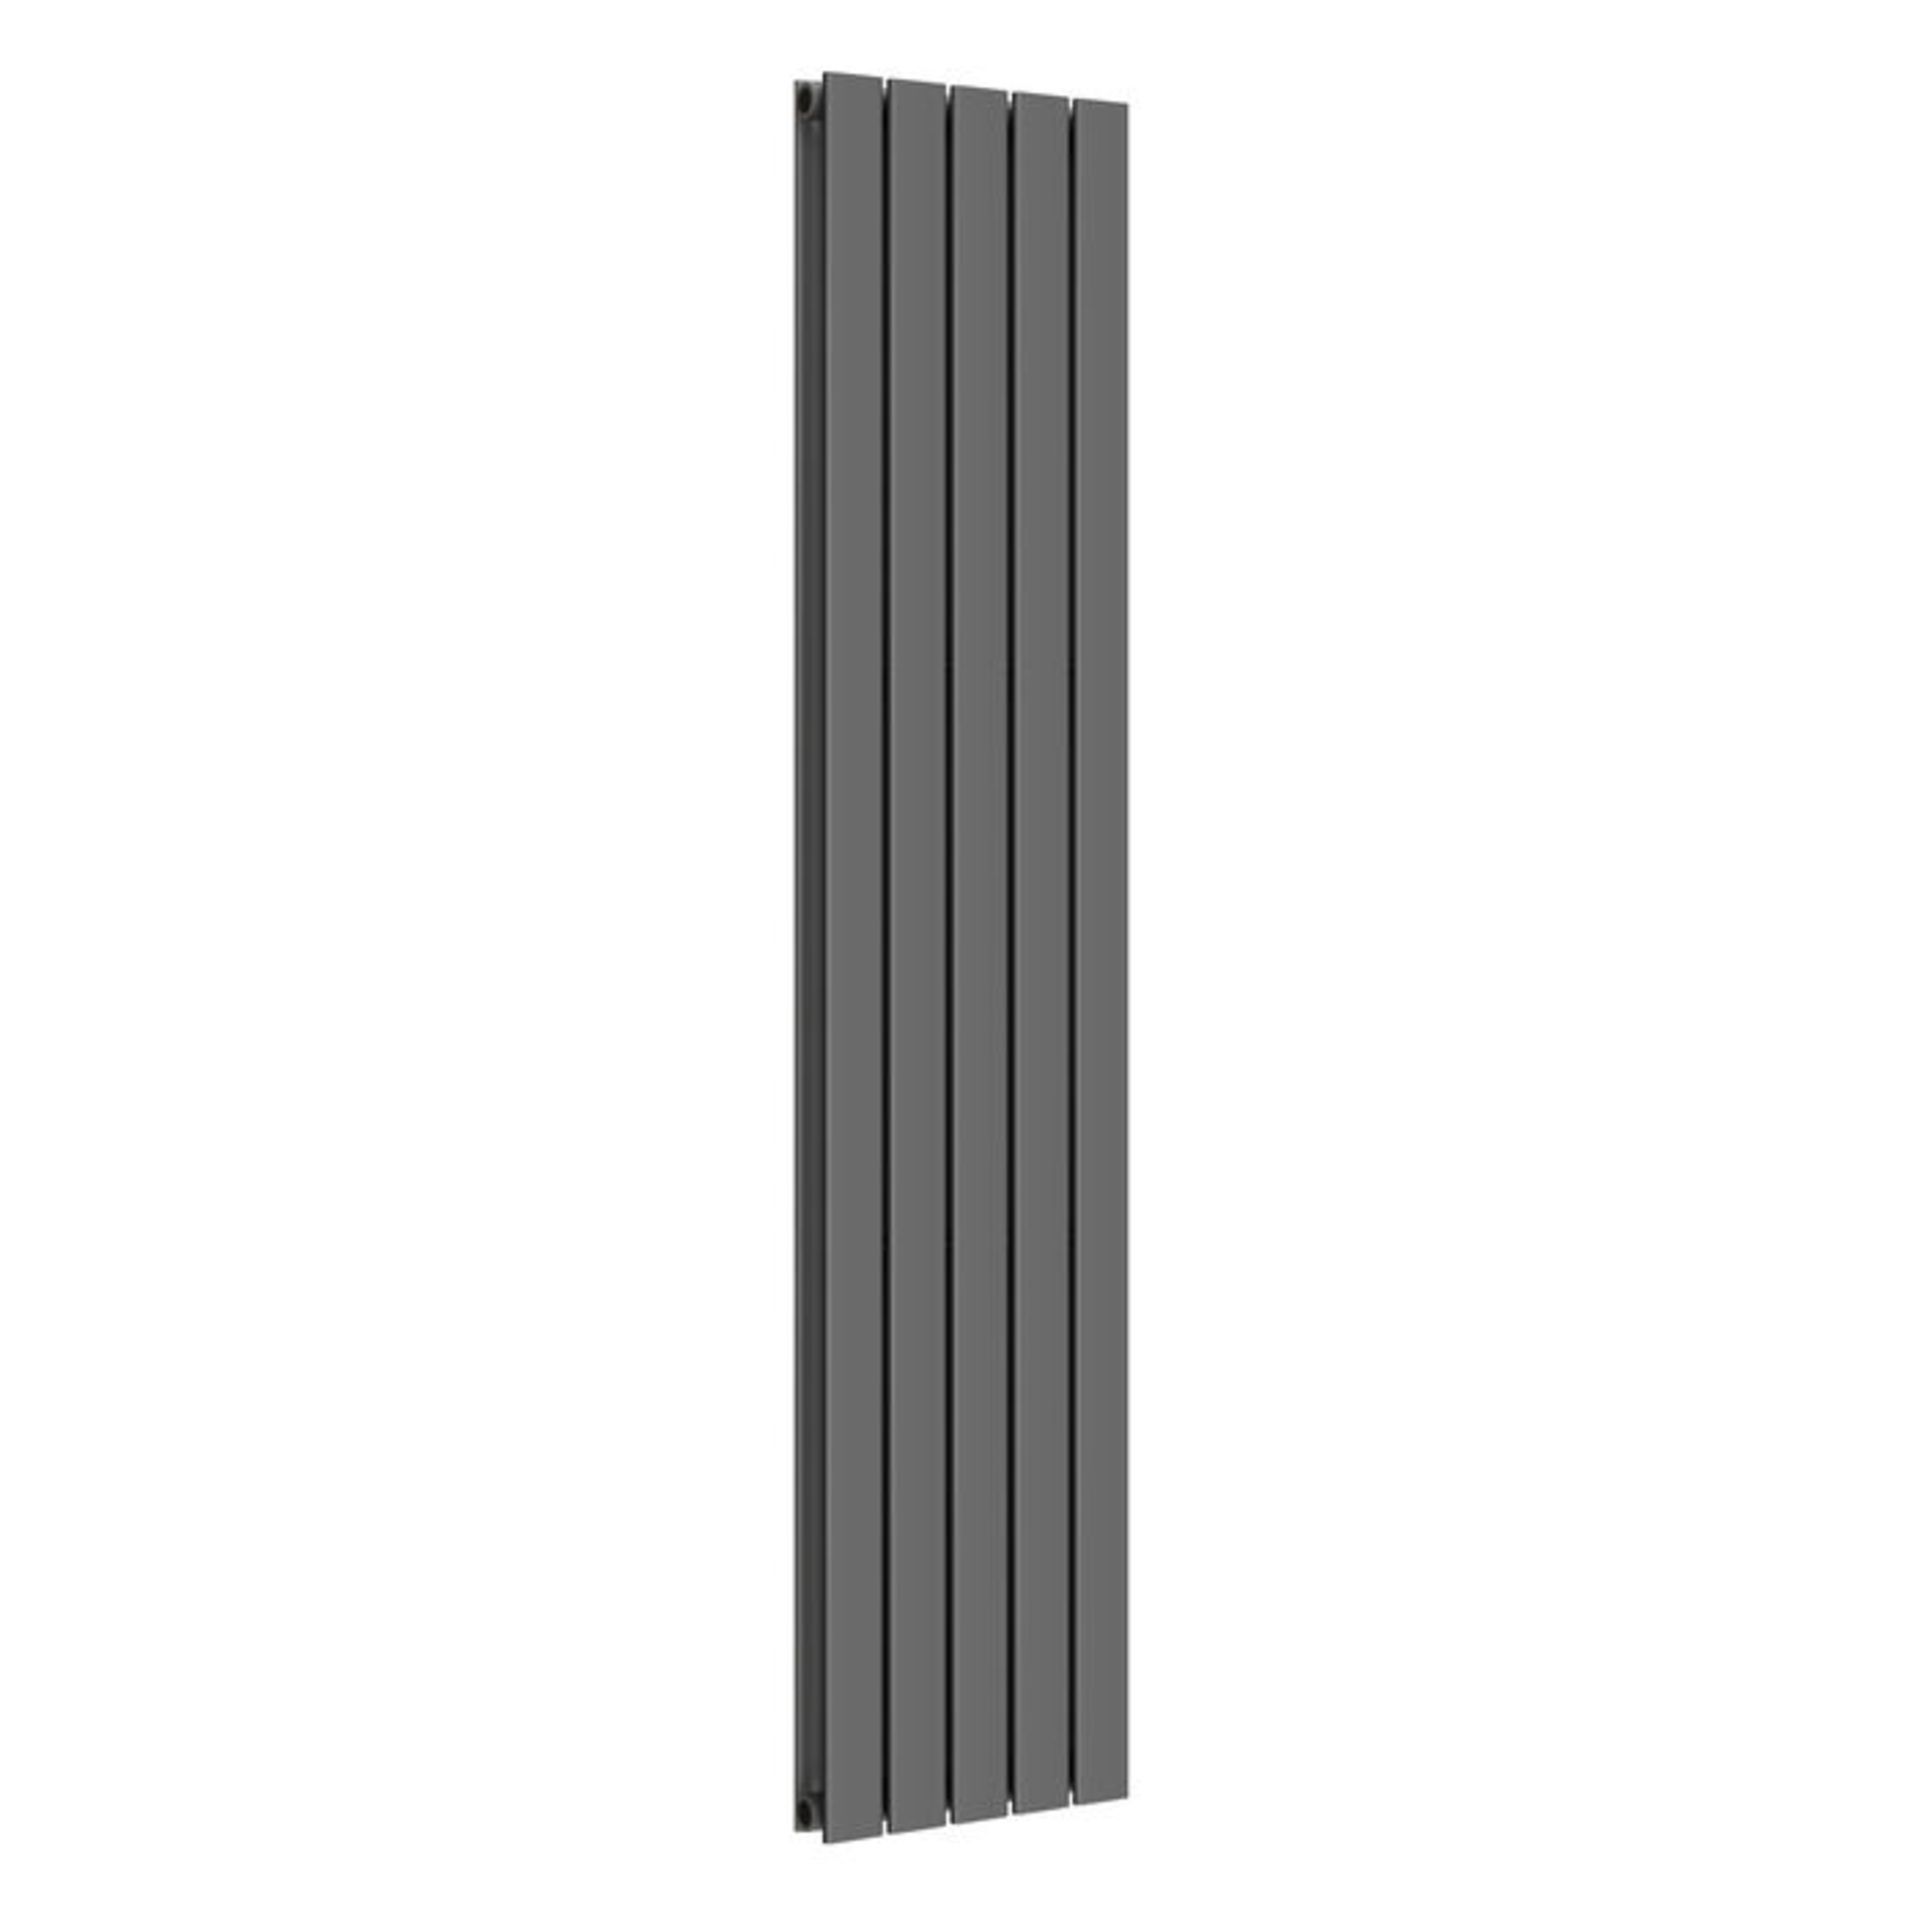 New Boxed 1800x360 mm Anthracite Single Flat Panel Vertical Radiator. RRP £364.99.Ara6/1800Sa . - Image 2 of 2